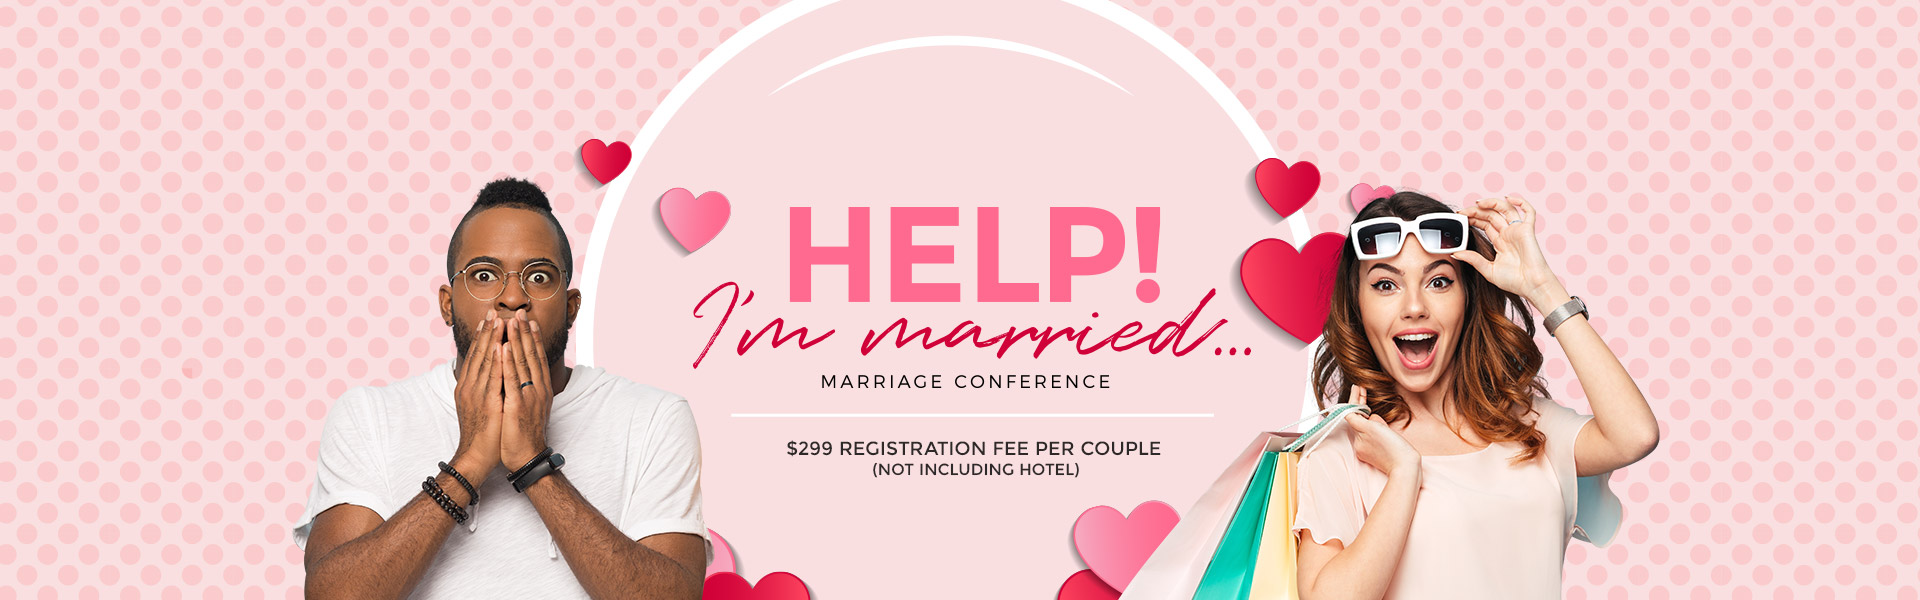 RCM Marriage Conference Header